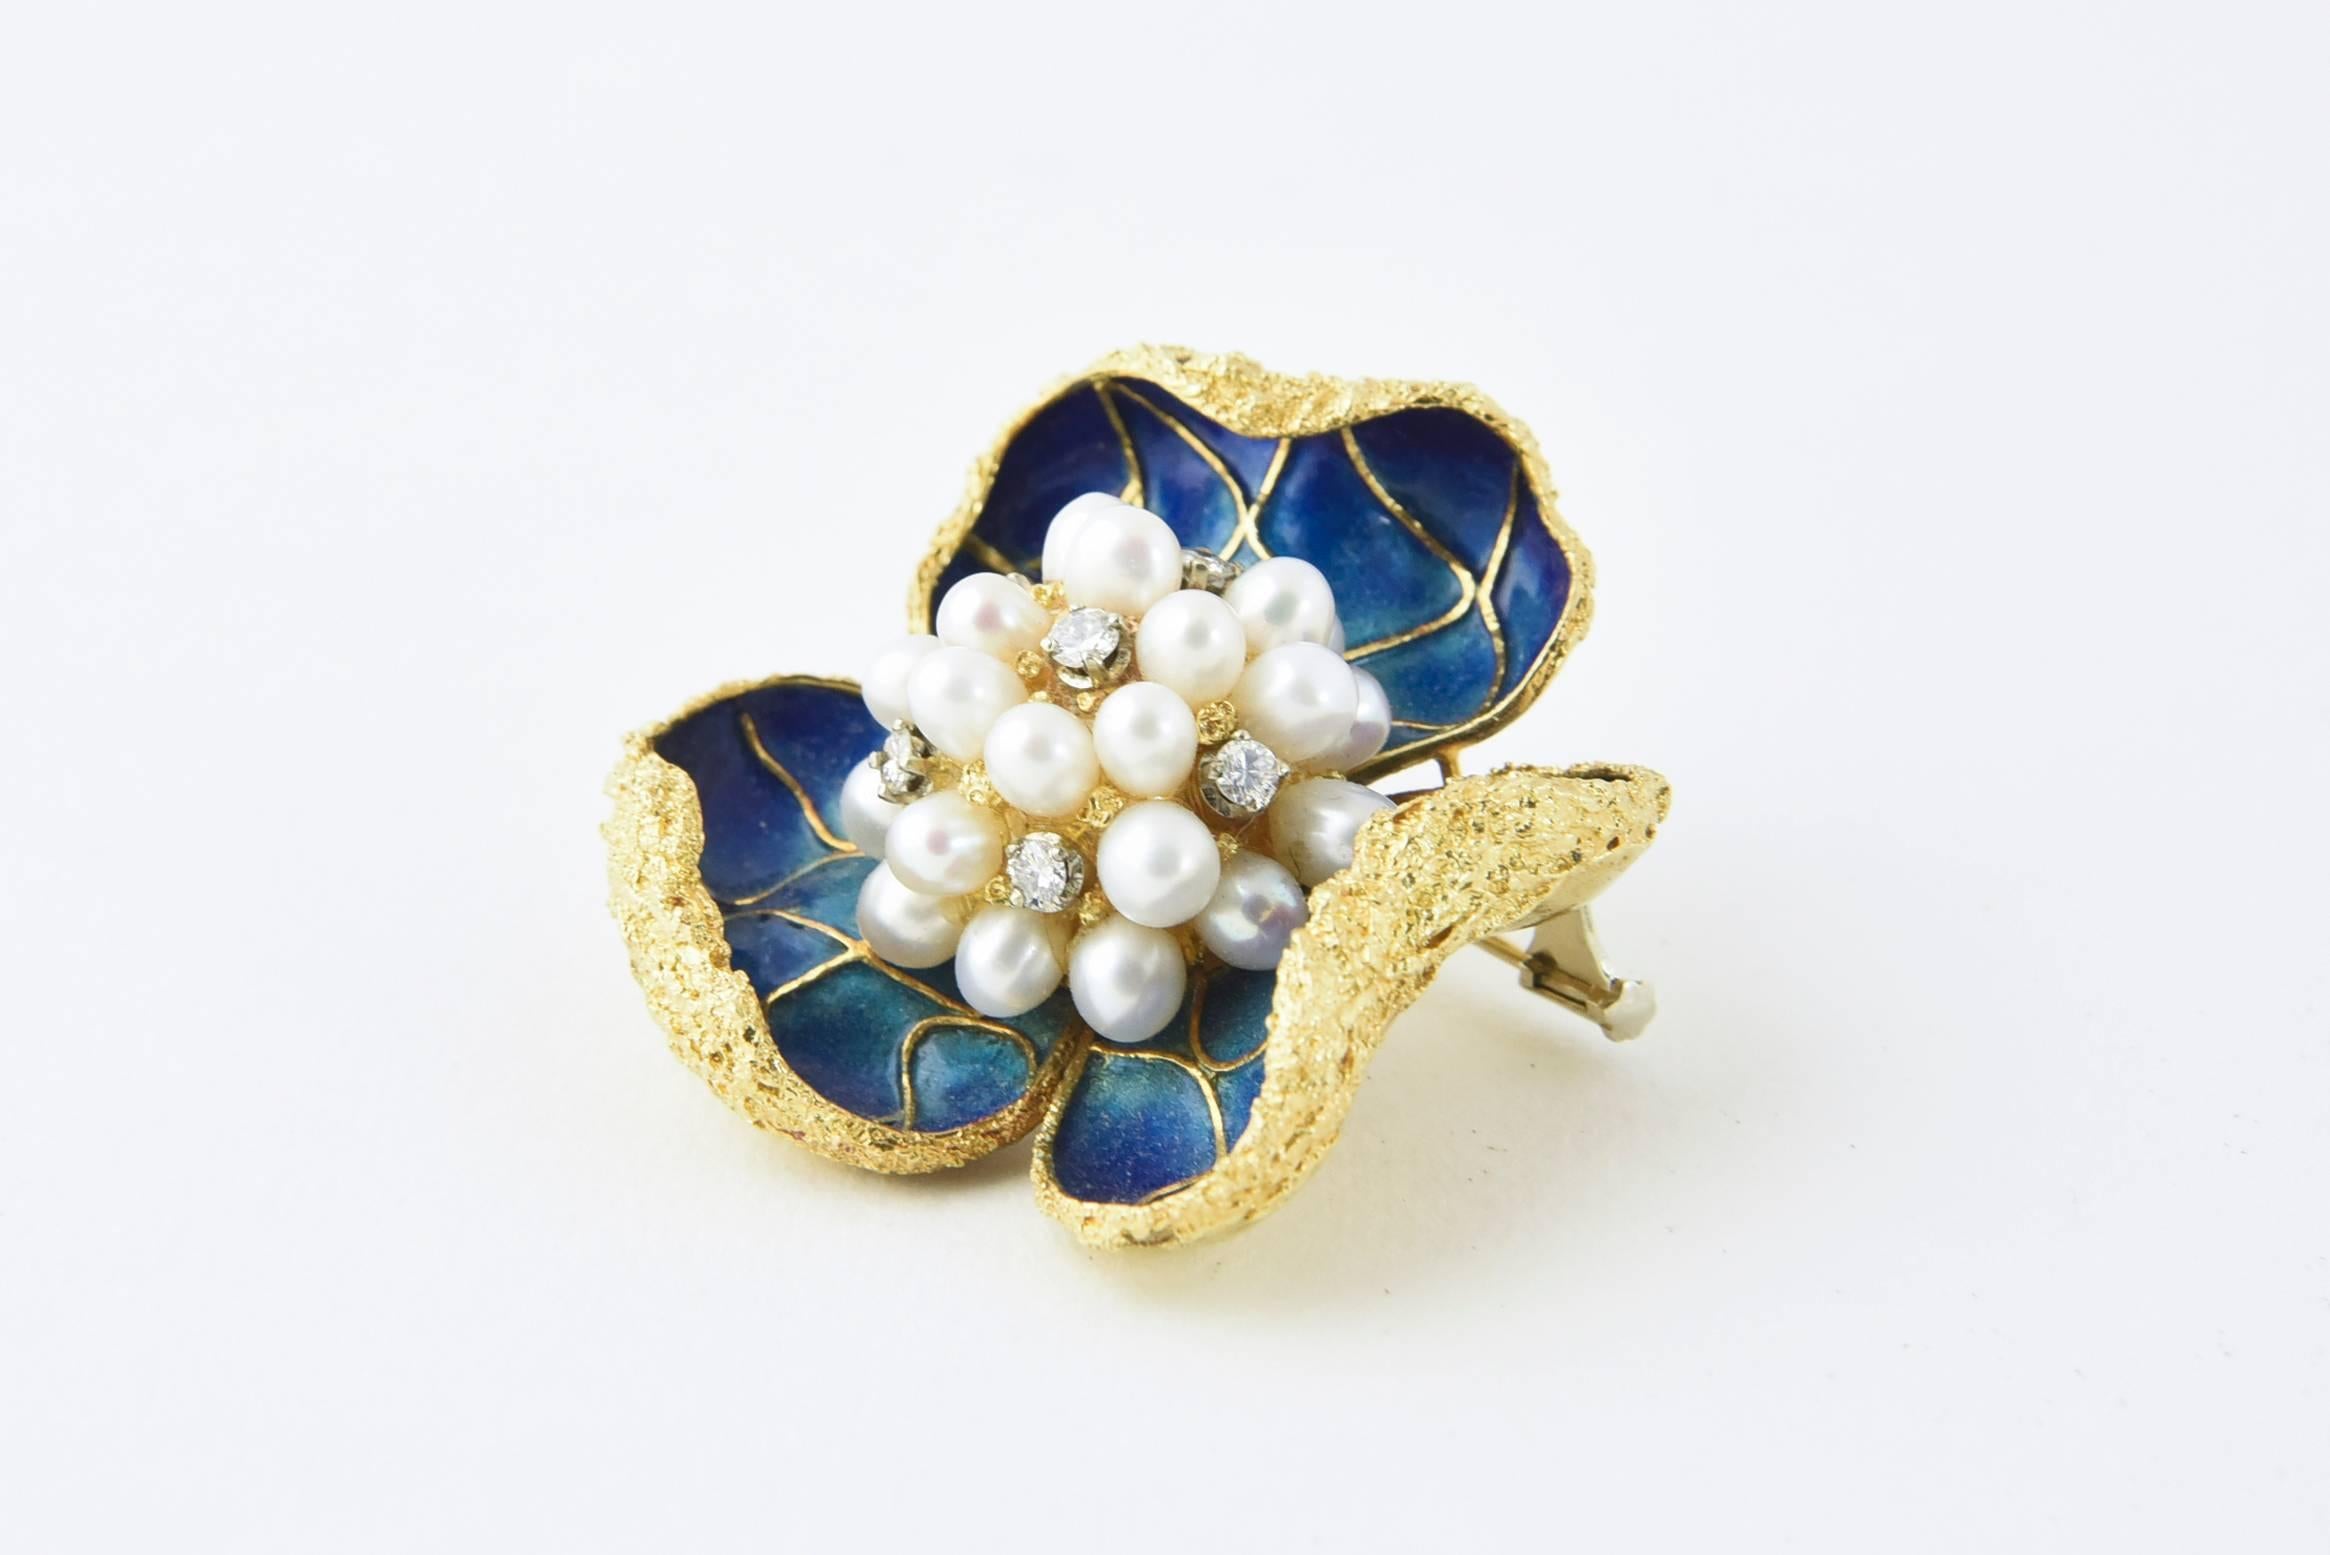 Beautifully made flower brooch with textured petals curling over an intense blue/green/purple enamel flower with a cultured pearl and diamond mounted in 18k yellow gold.